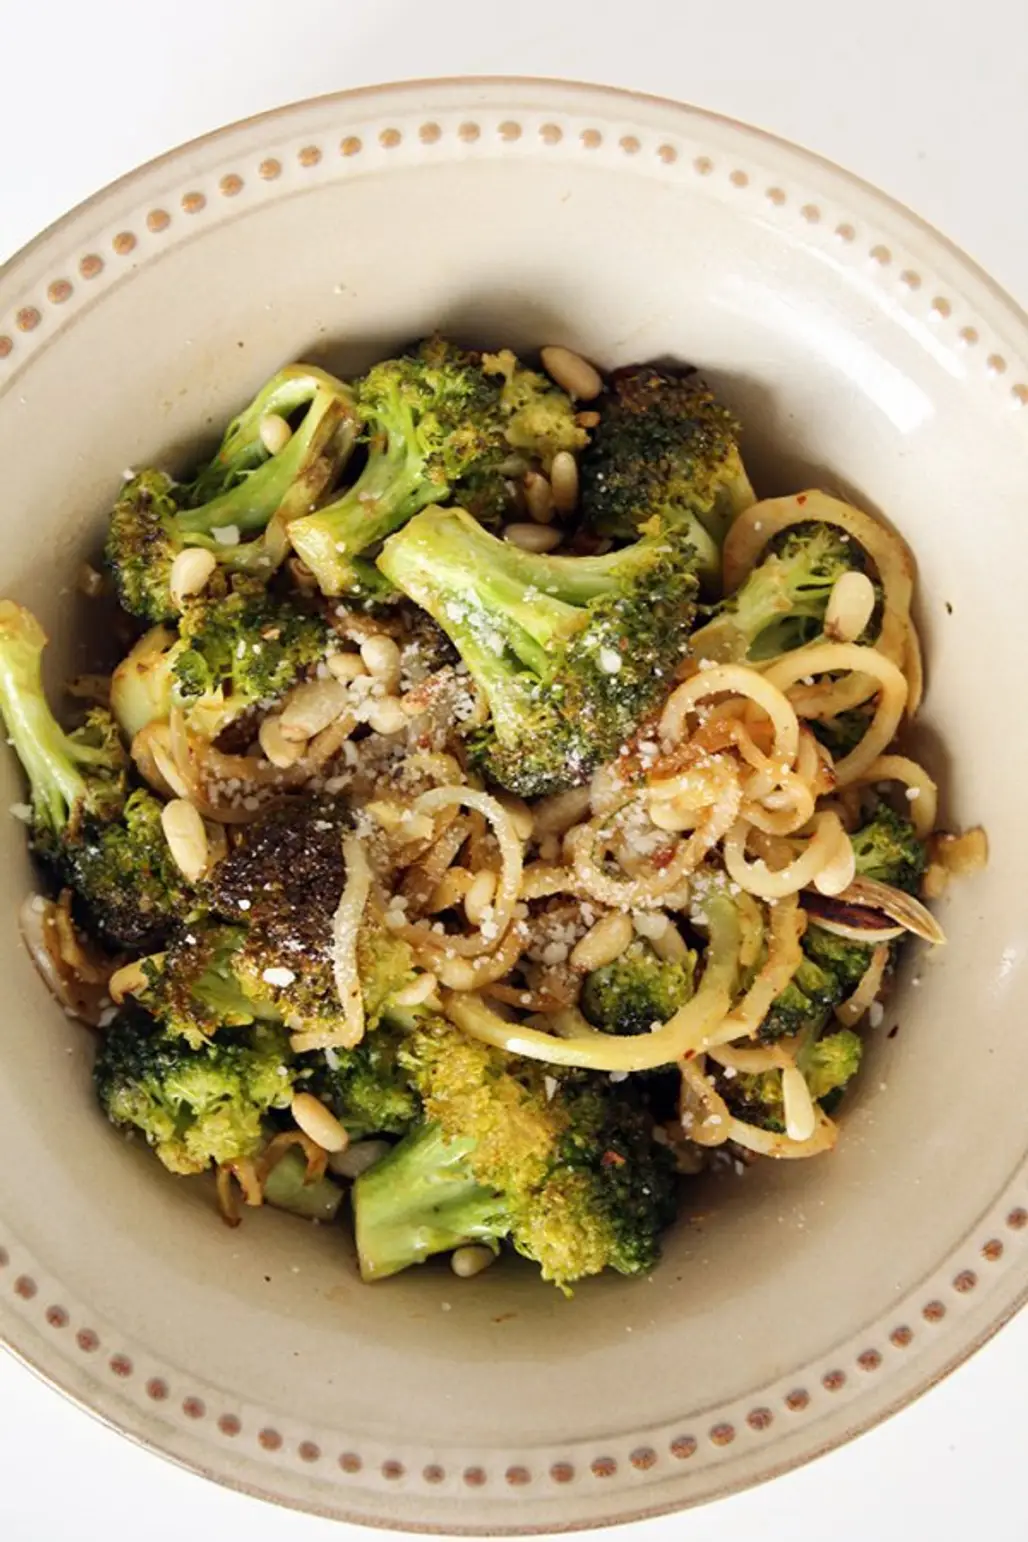 GARLIC BROCCOLI NOODLES with Broccoli and TOASTED PINE NUTS